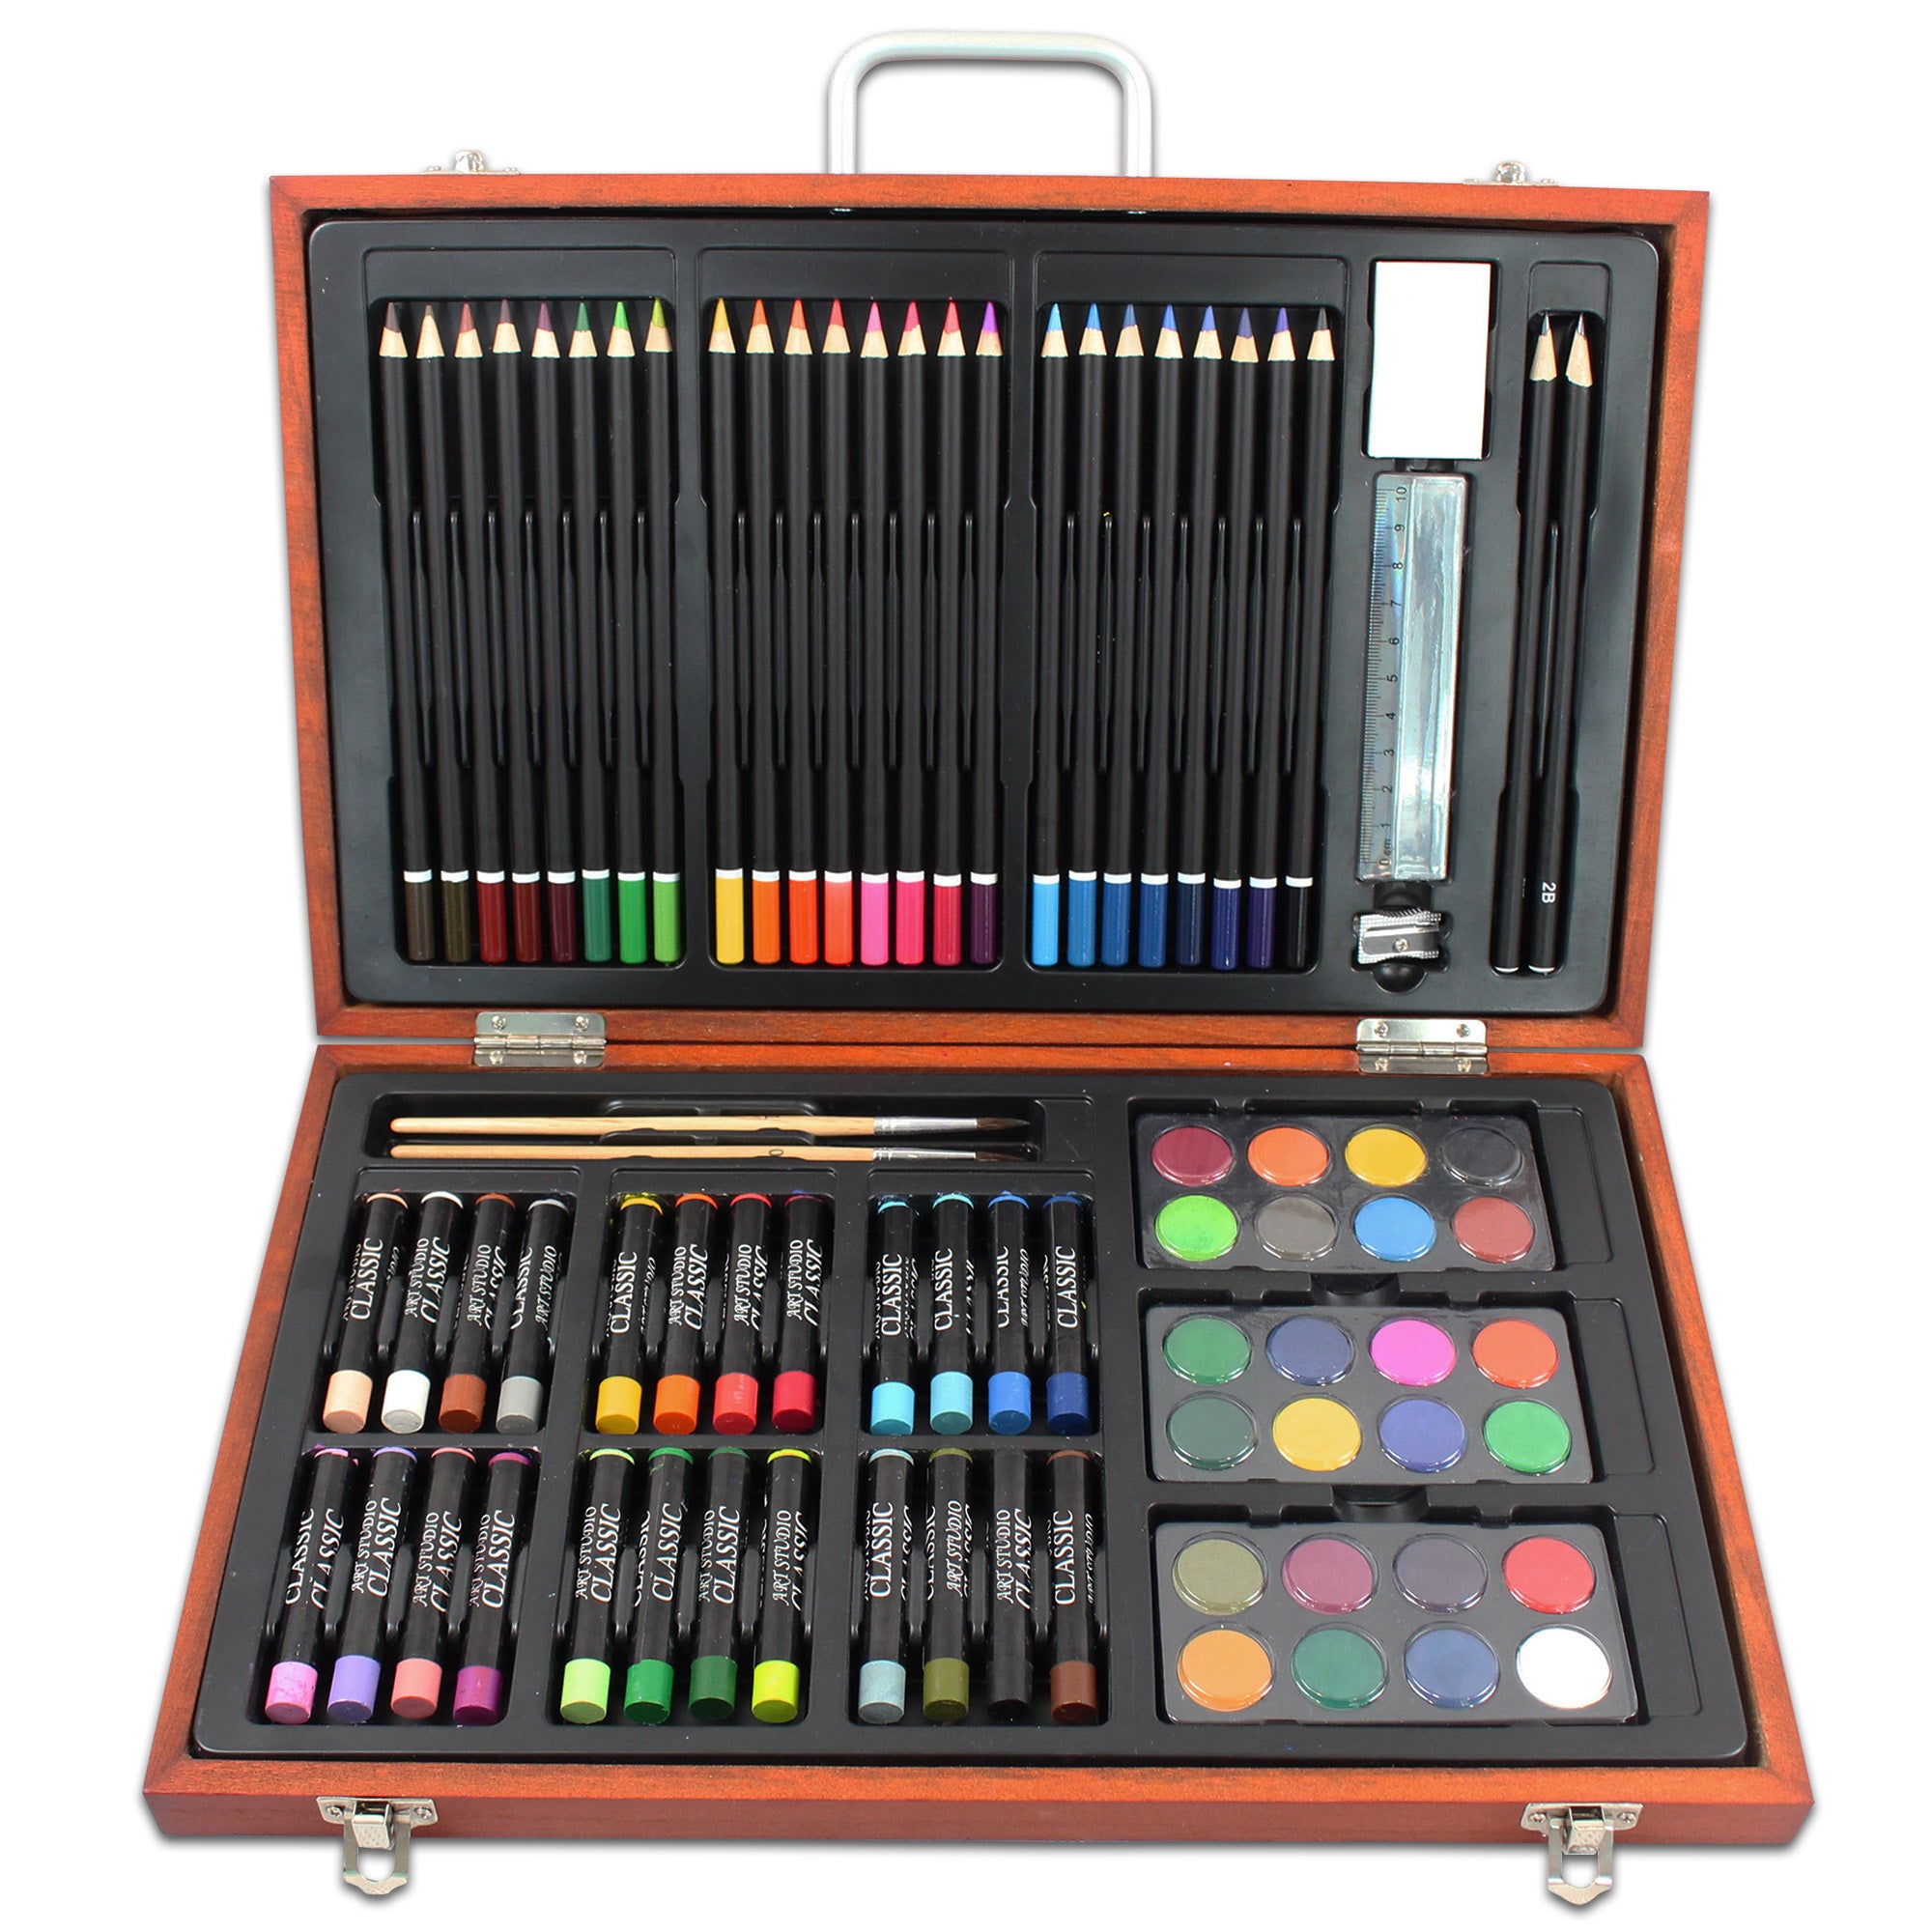 Leogreen-Kids-Deluxe-Art-kit-Art-and-Paint-Set79-pieces-of-art-and-paint-for-children-with-wooden-and-metal-box